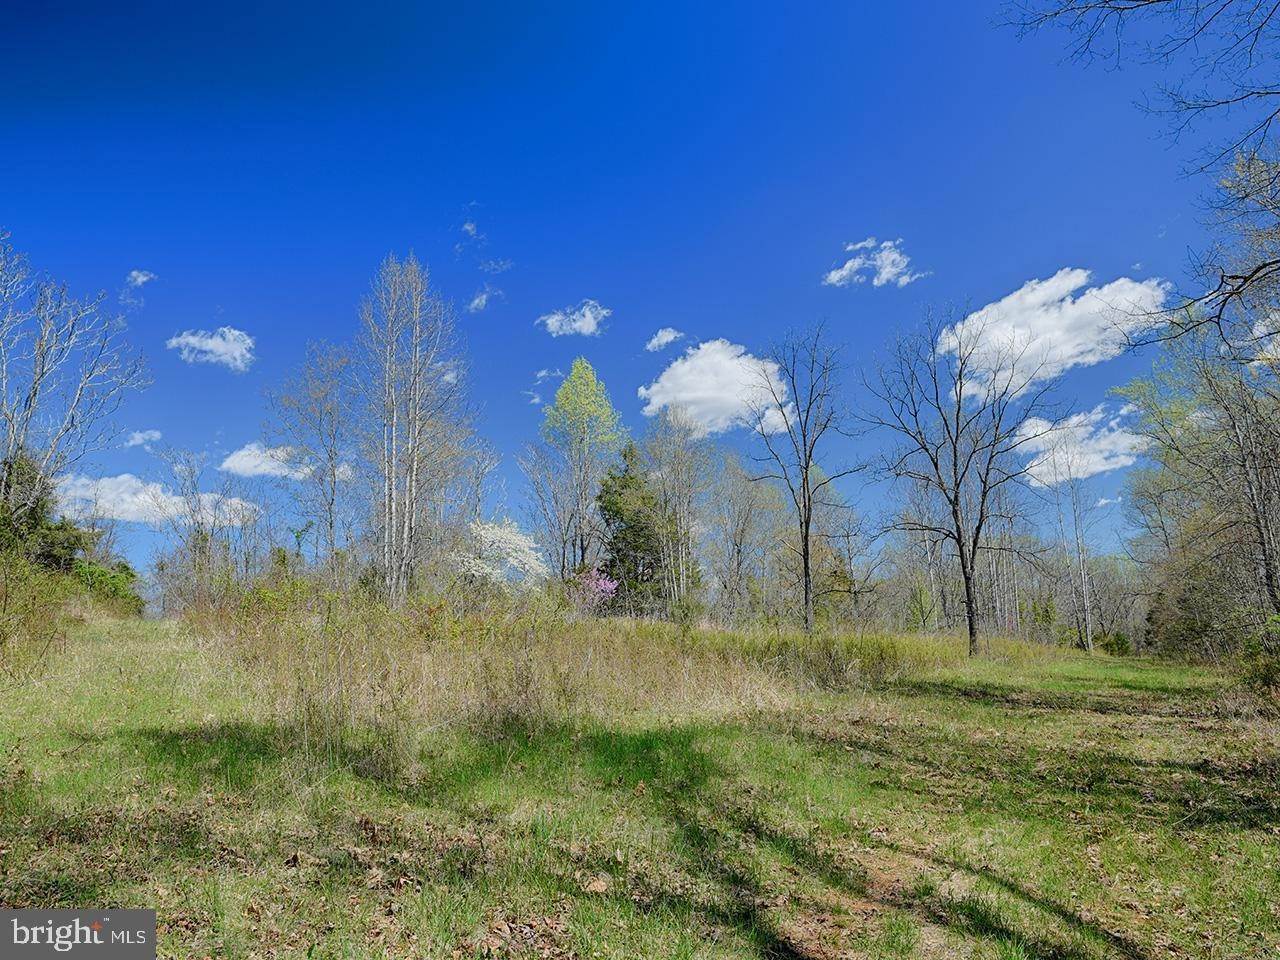 8. Land for Sale at Faber, Virginia 22938 United States